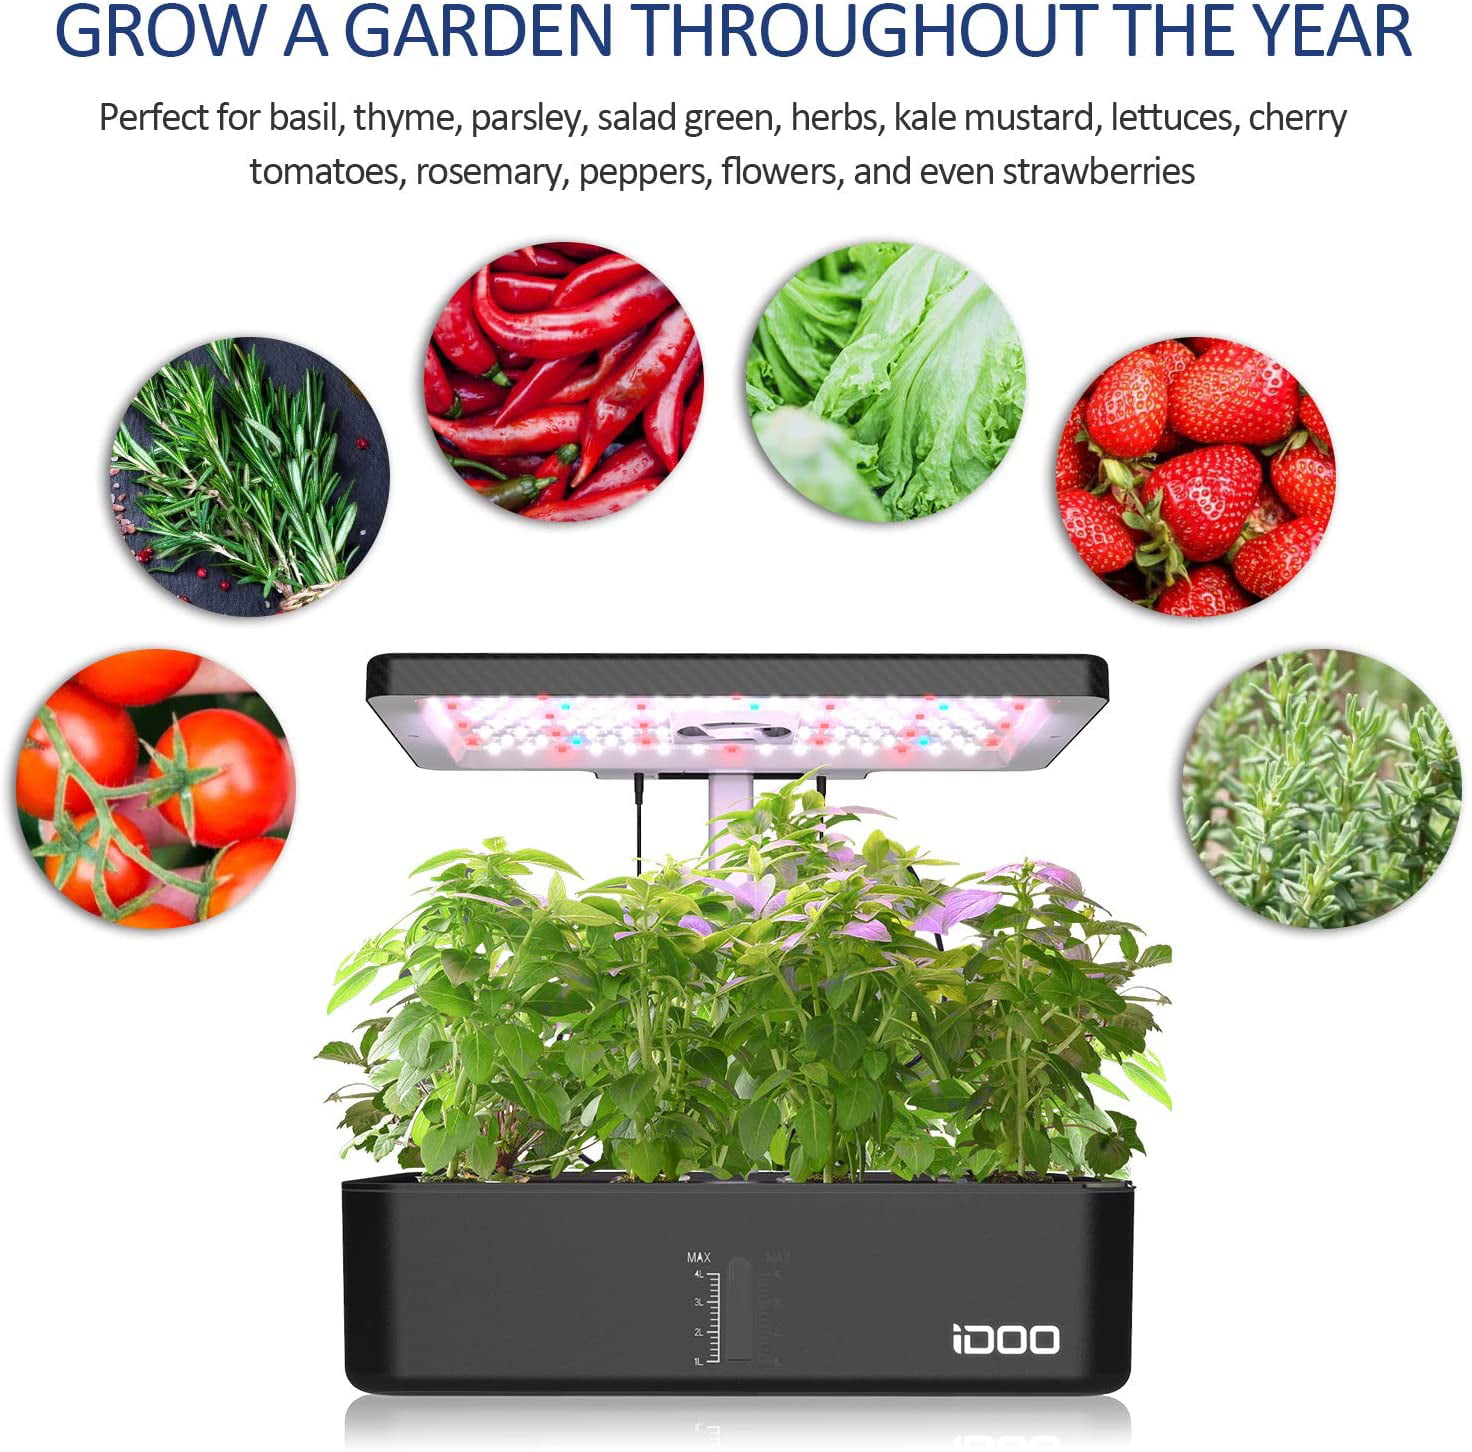 Height Adjustable Herb Garden for Vegetables & Fruits Black Plants Germination Kits for Home Kitchen Automatic Timer Indoor Garden with LED Lights QIDO 12 Pods Hydroponics Growing System 